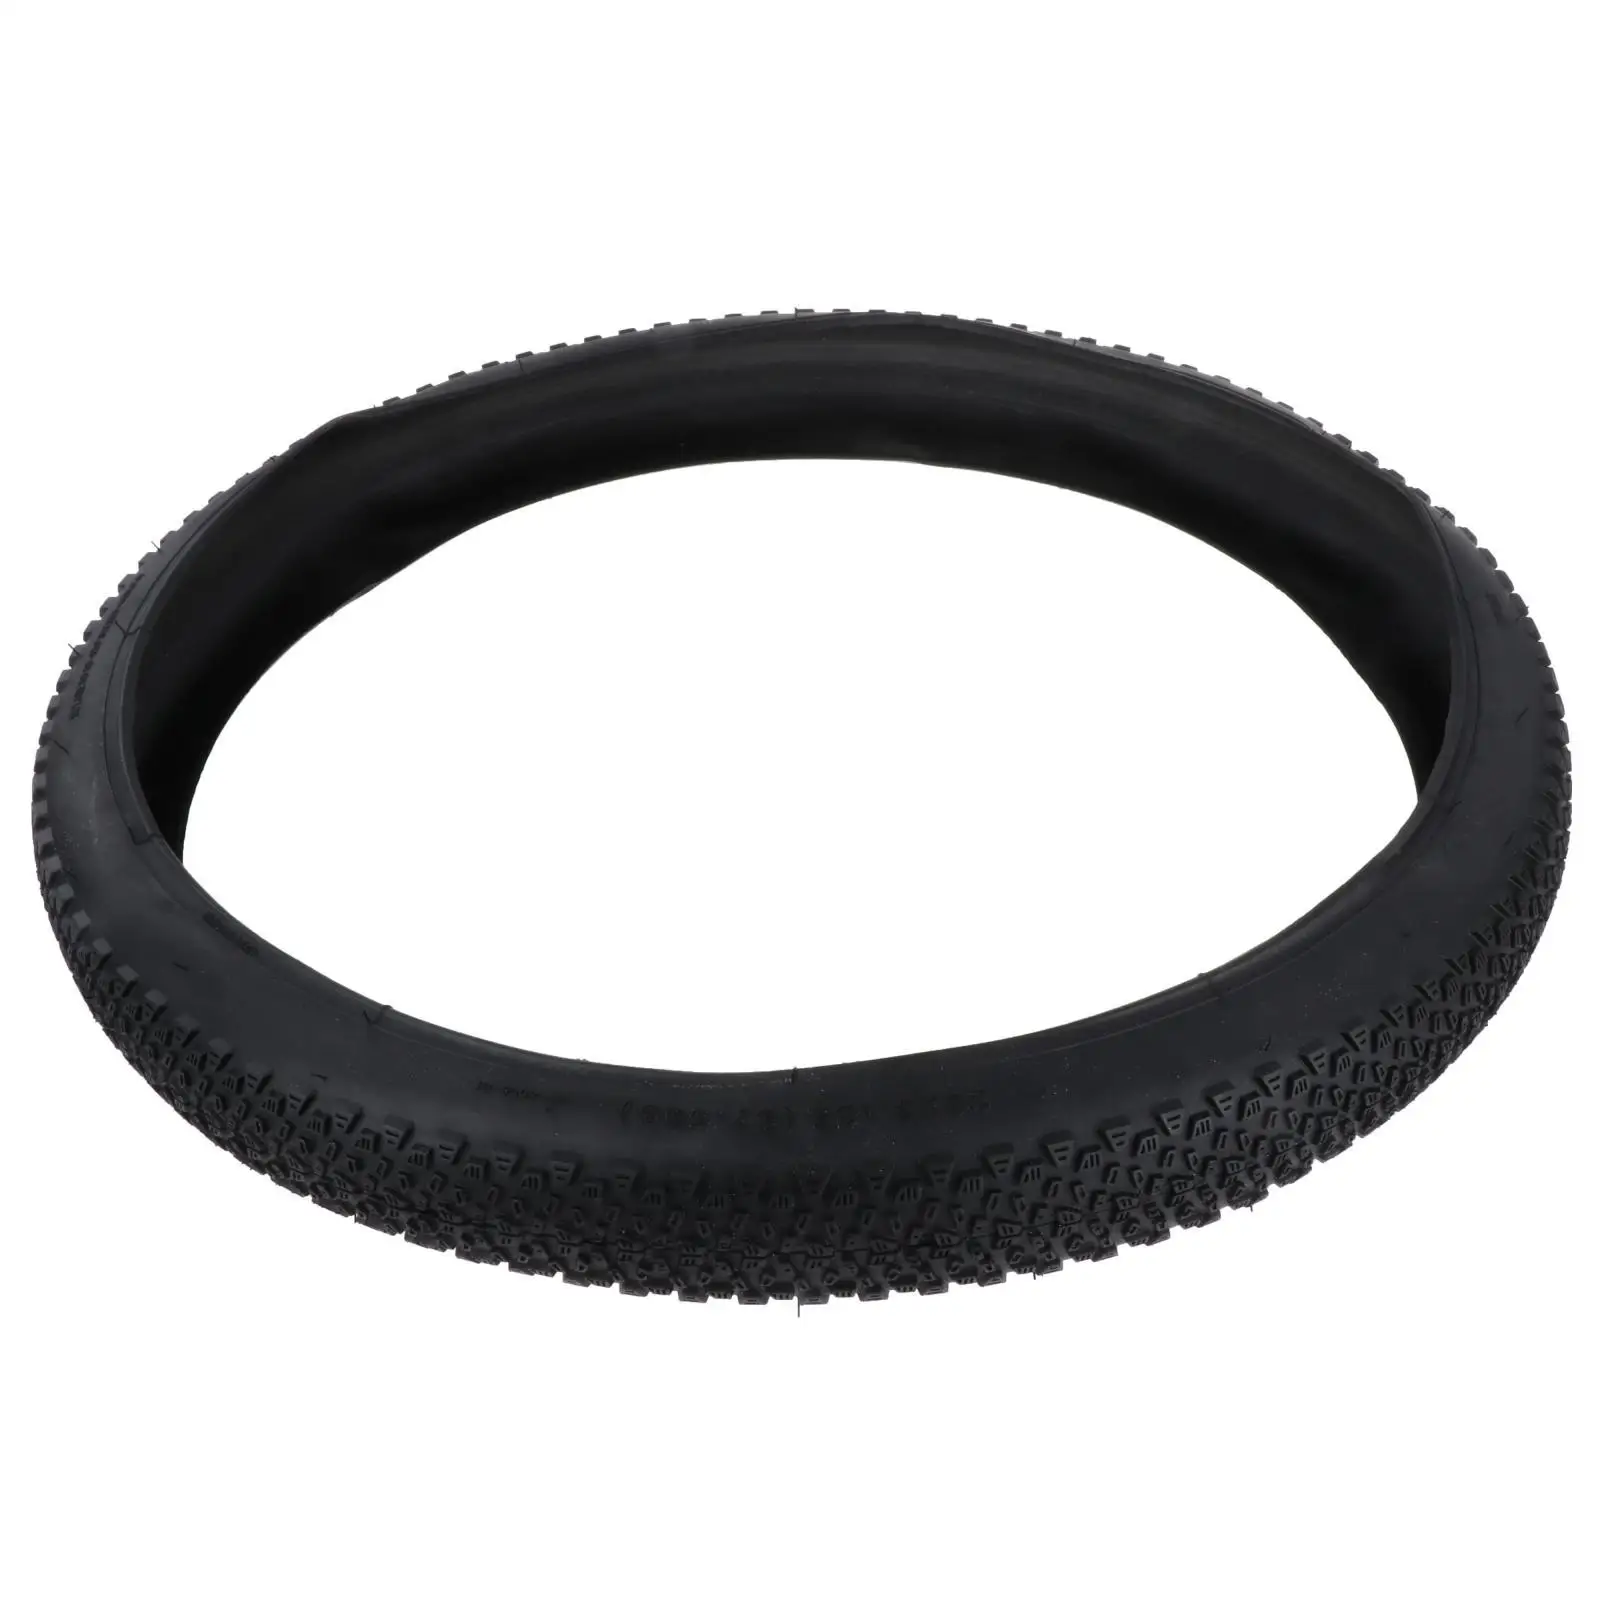  Outer Tyre Portable Traction Puncture Proof Replaceable for Bike